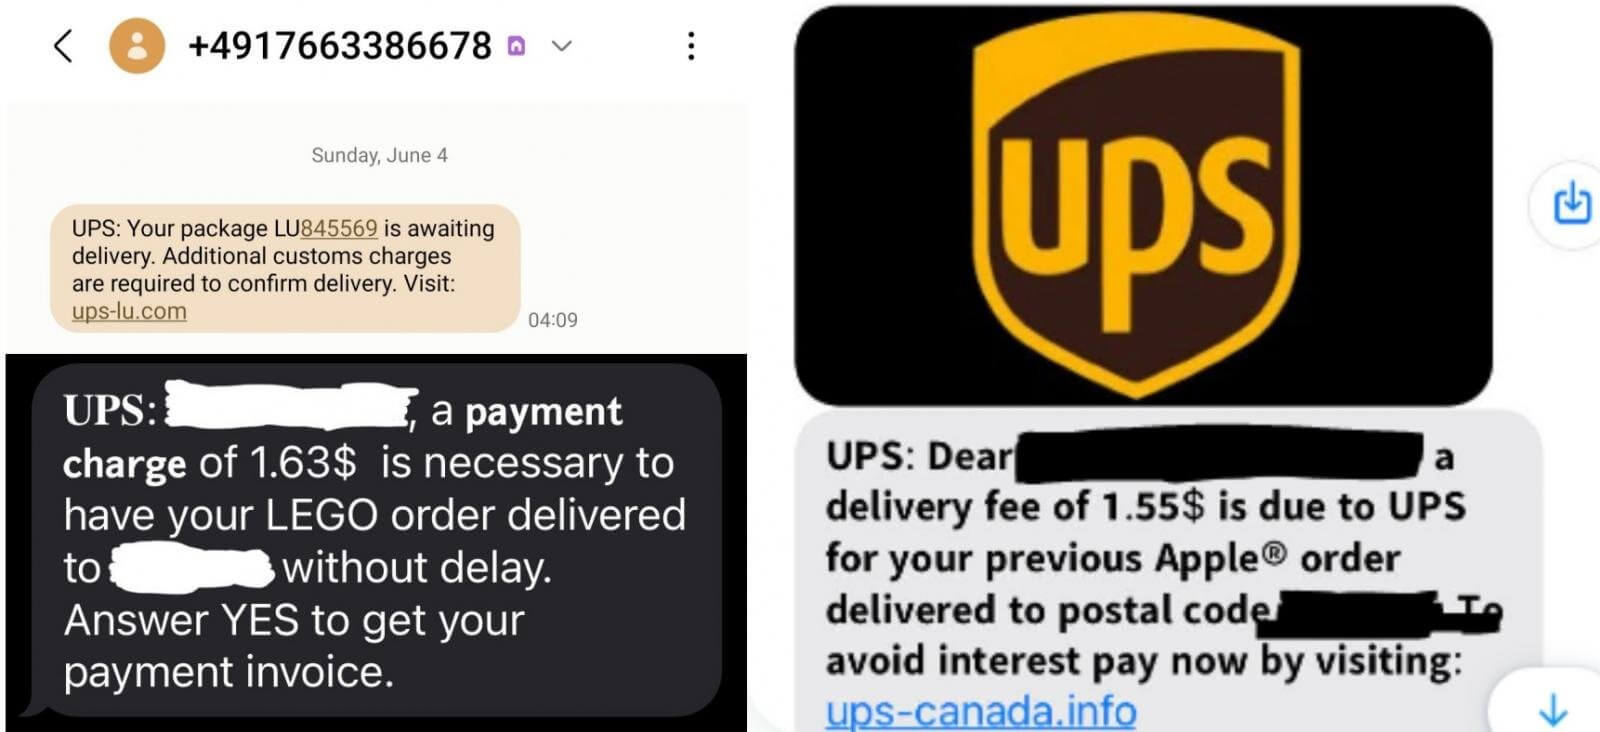 ups phishing messages